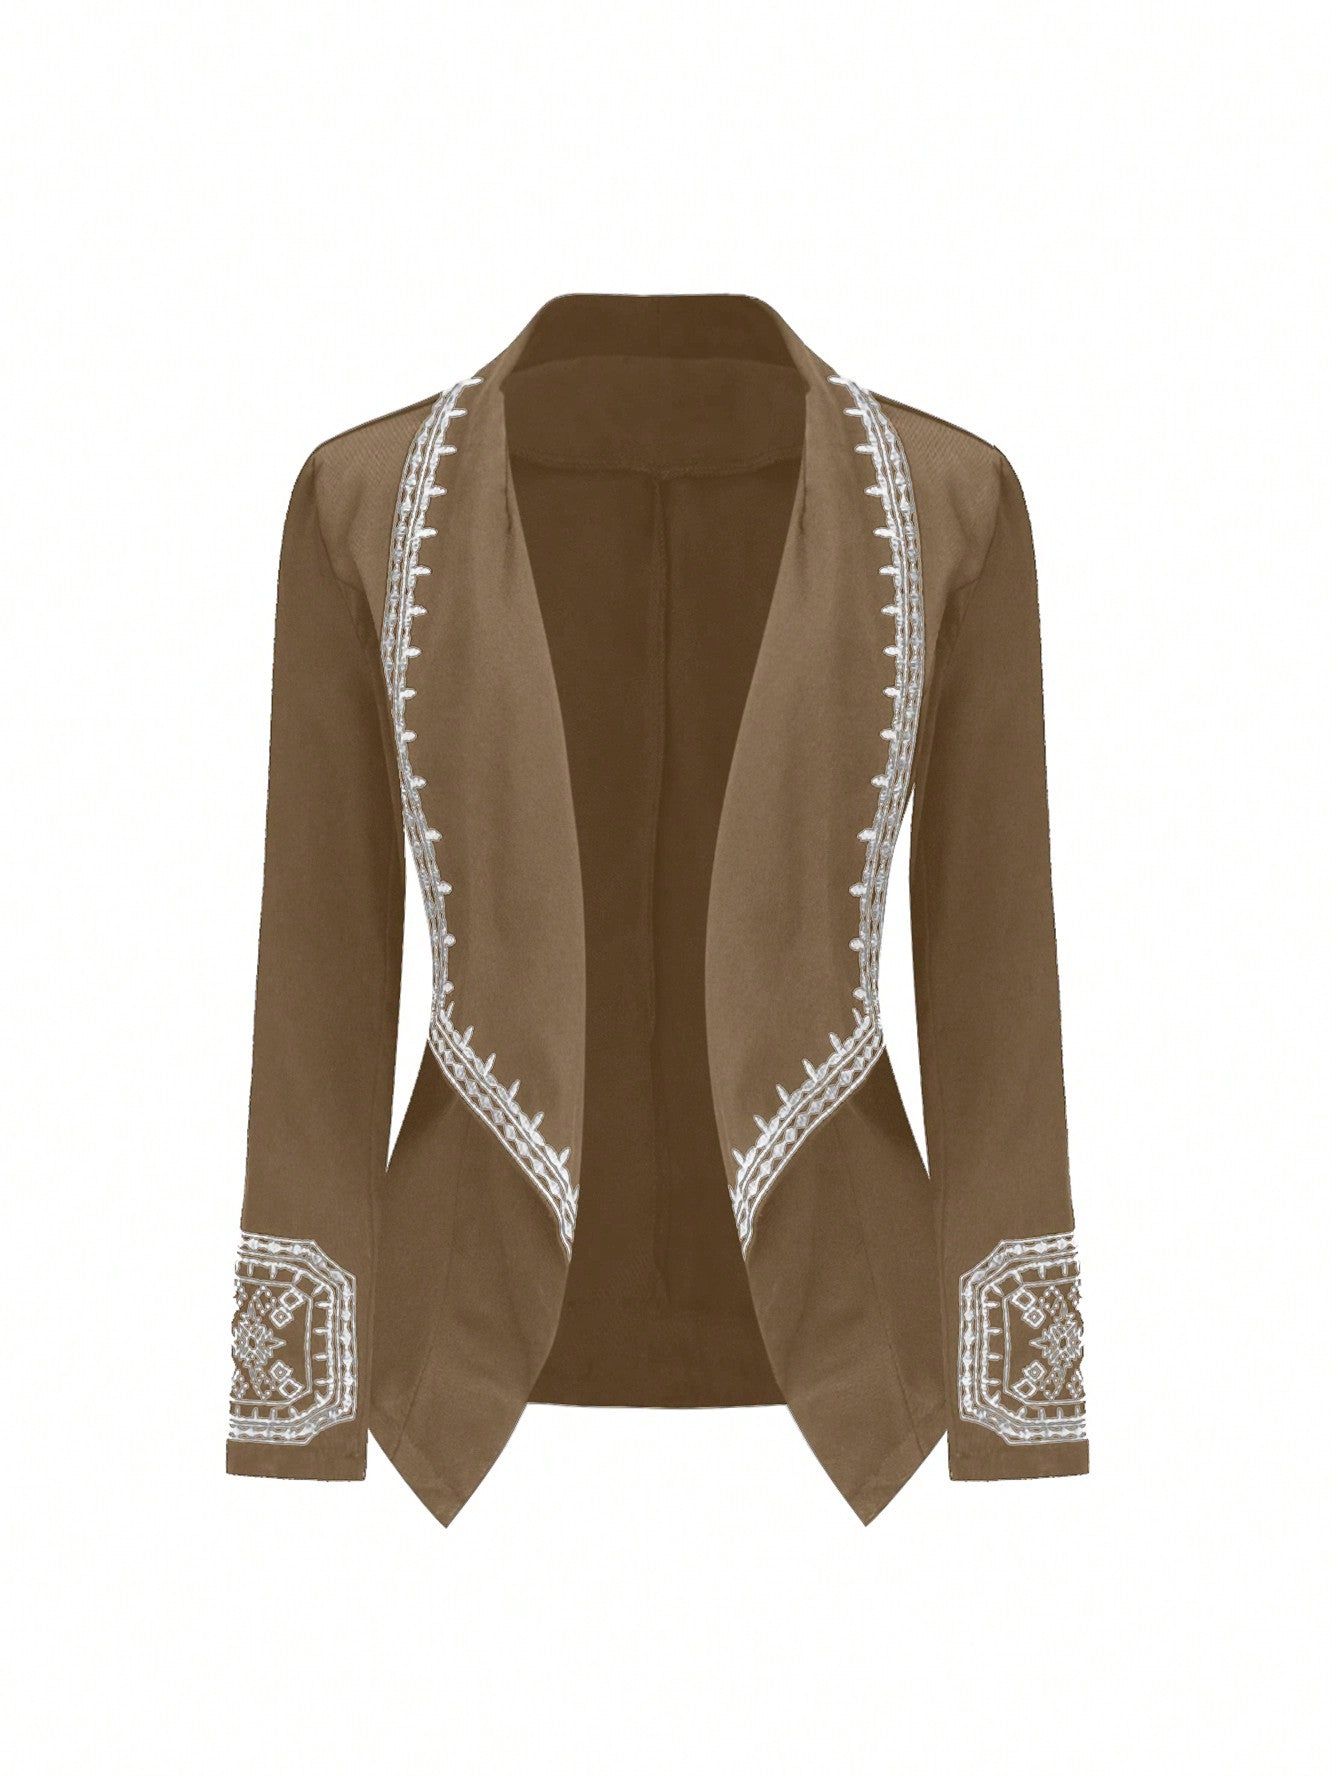 Plus Size Embroidered Suit Jacket With Stand Collar